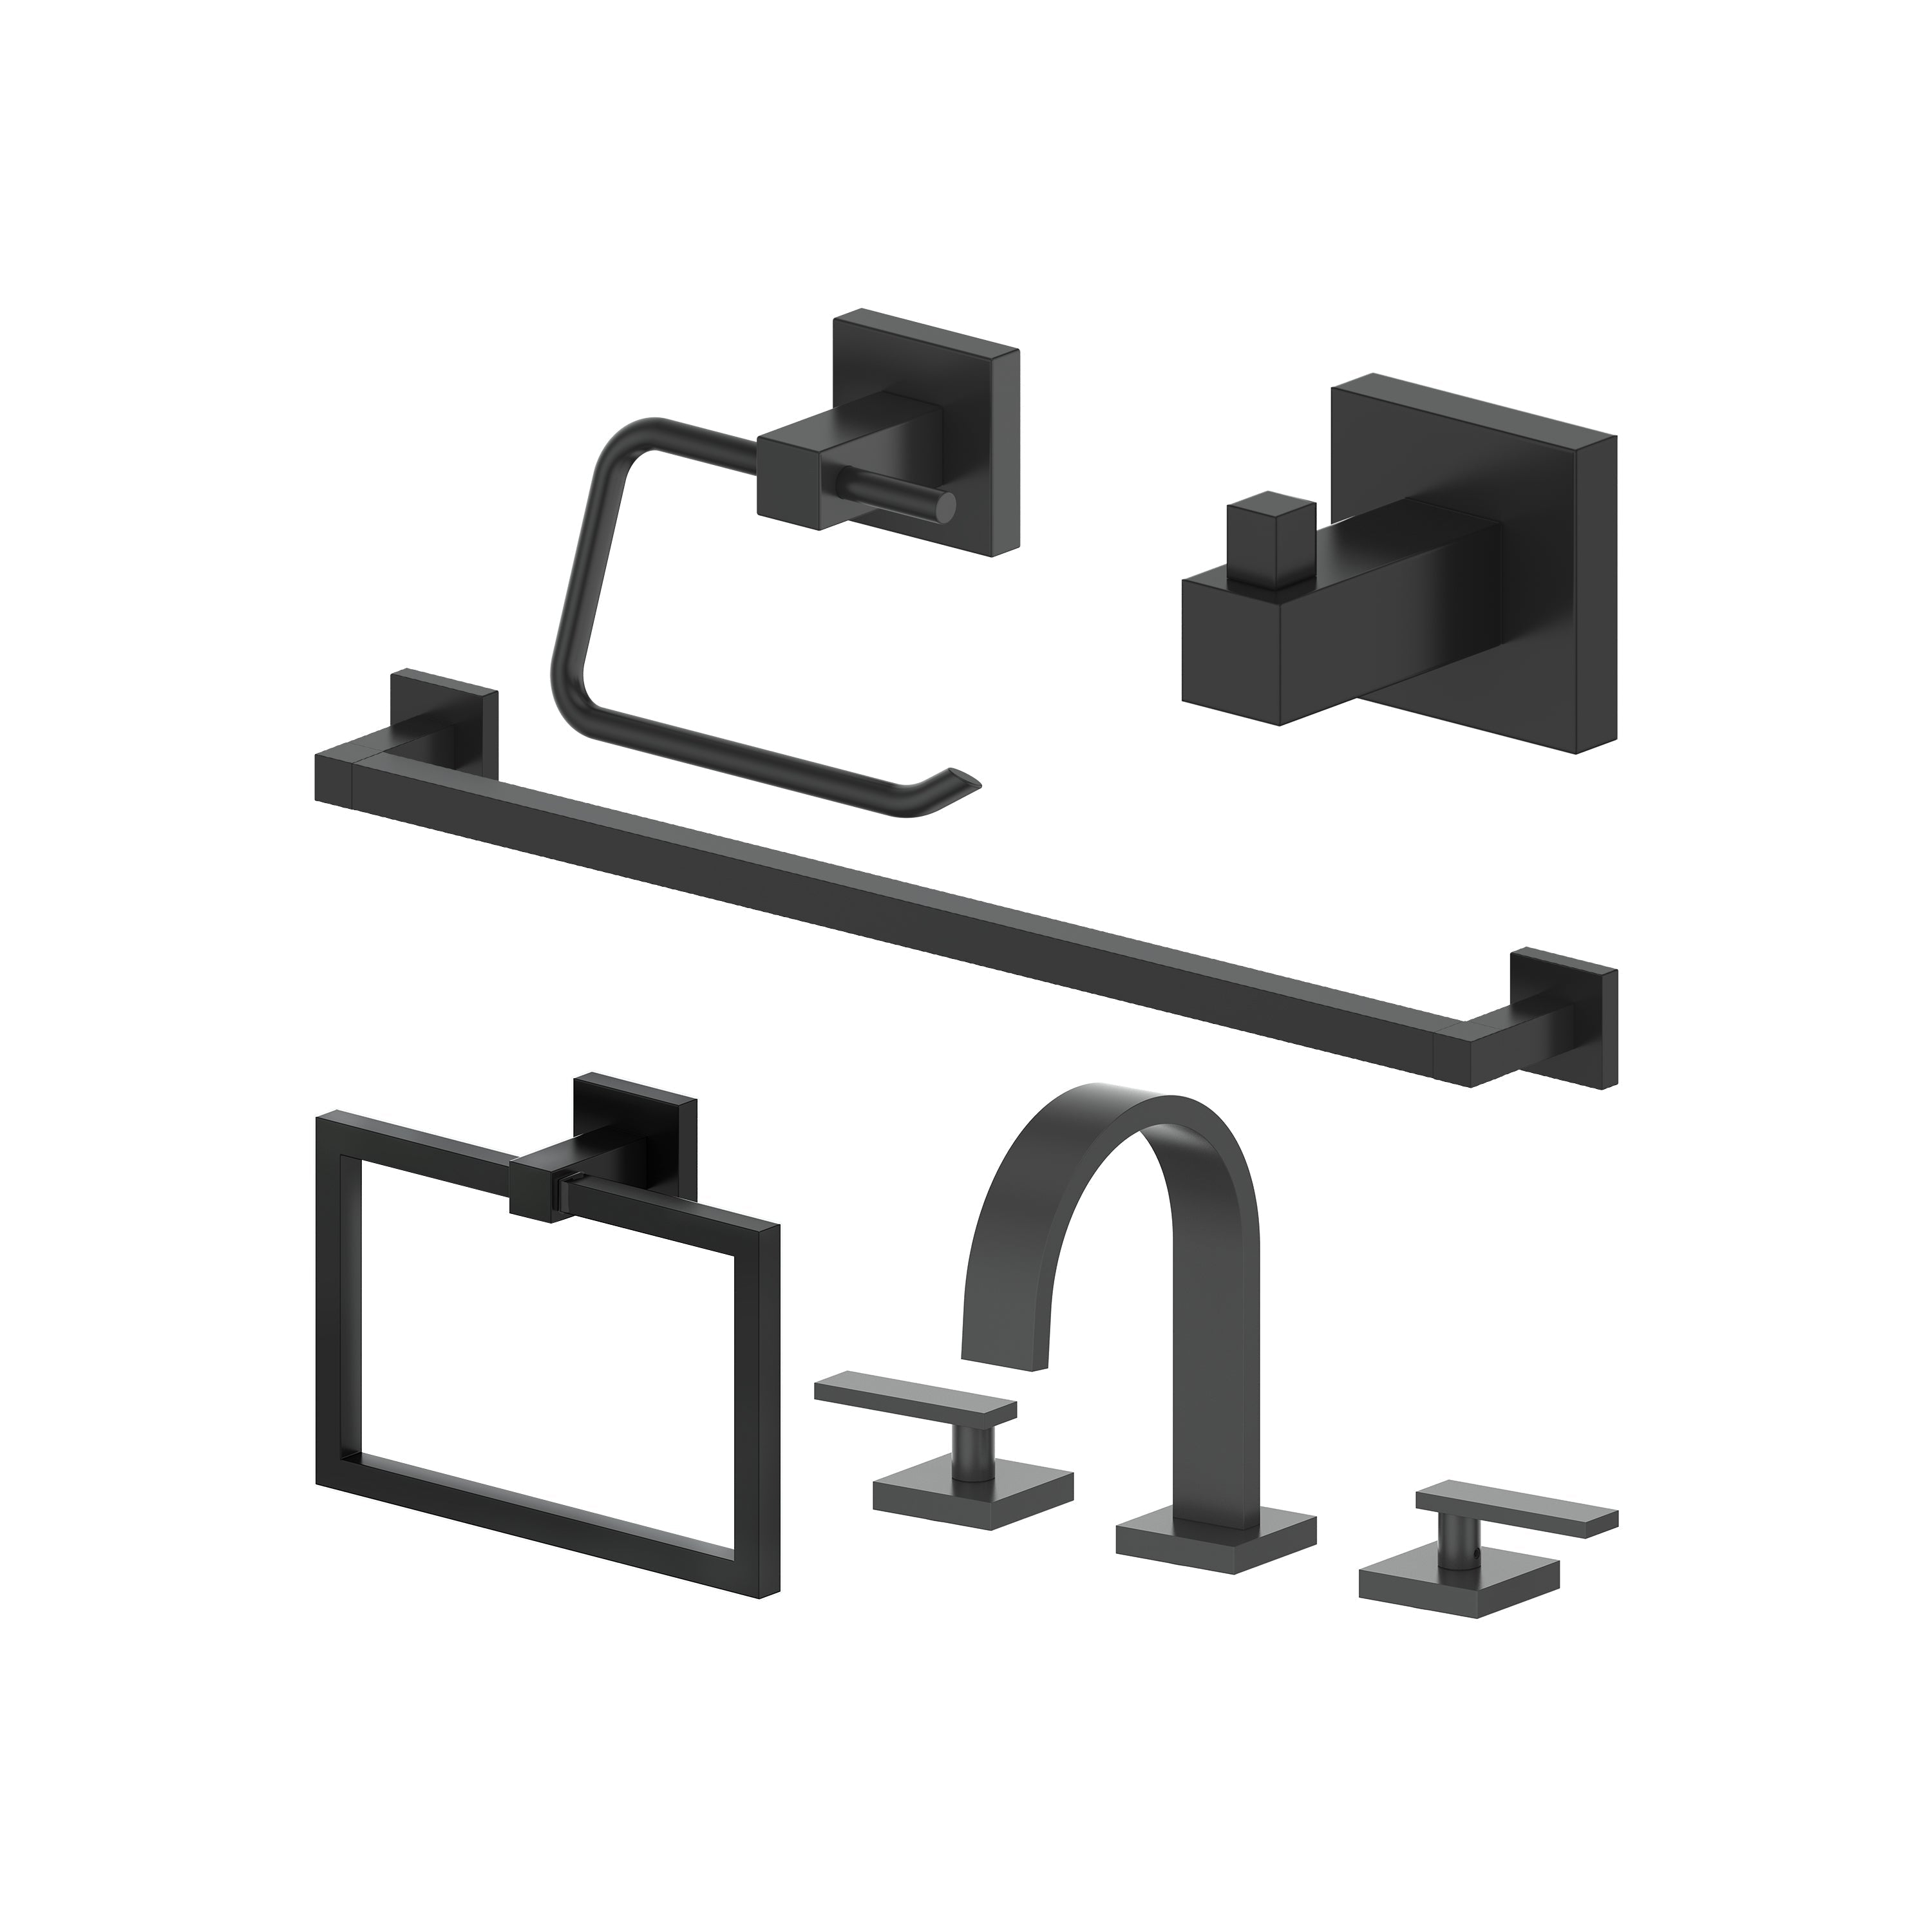 5 Piece Bathroom Faucet and Accessory Bundle(5BP-BLSACCF-MB) - New Star Living